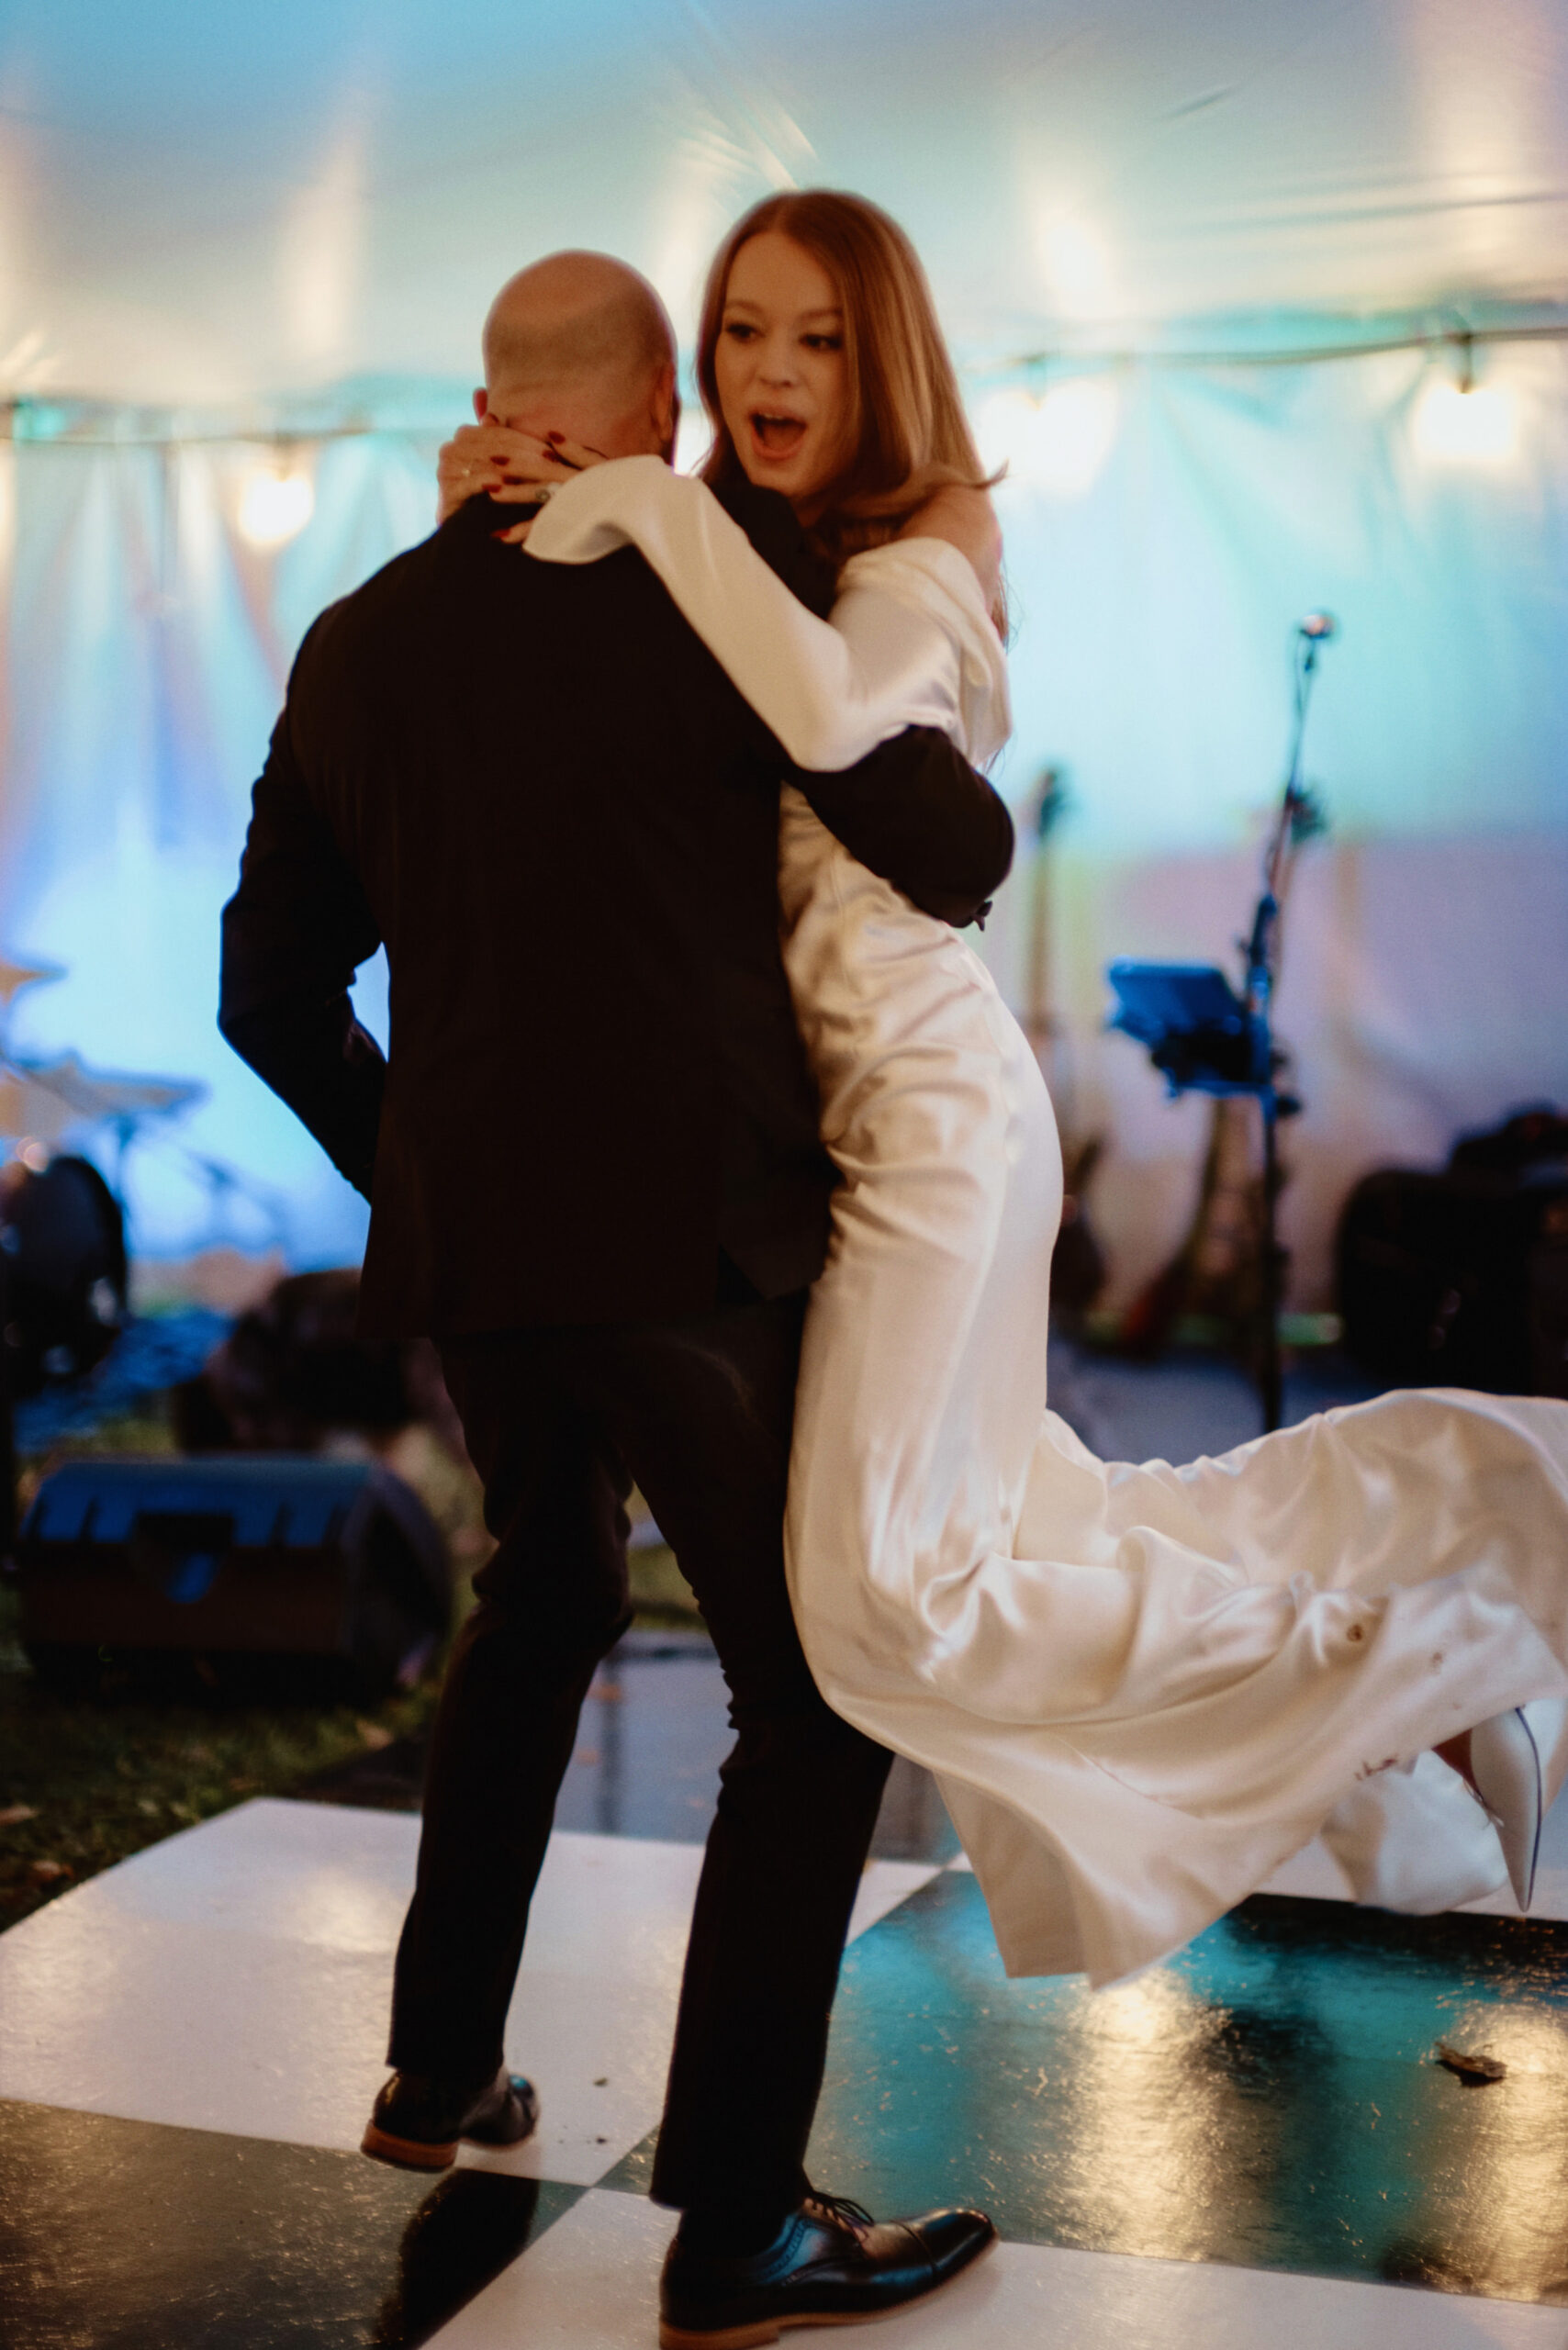 The groom is carrying the bride on the dance floor. Image by Jenny Fu Studio